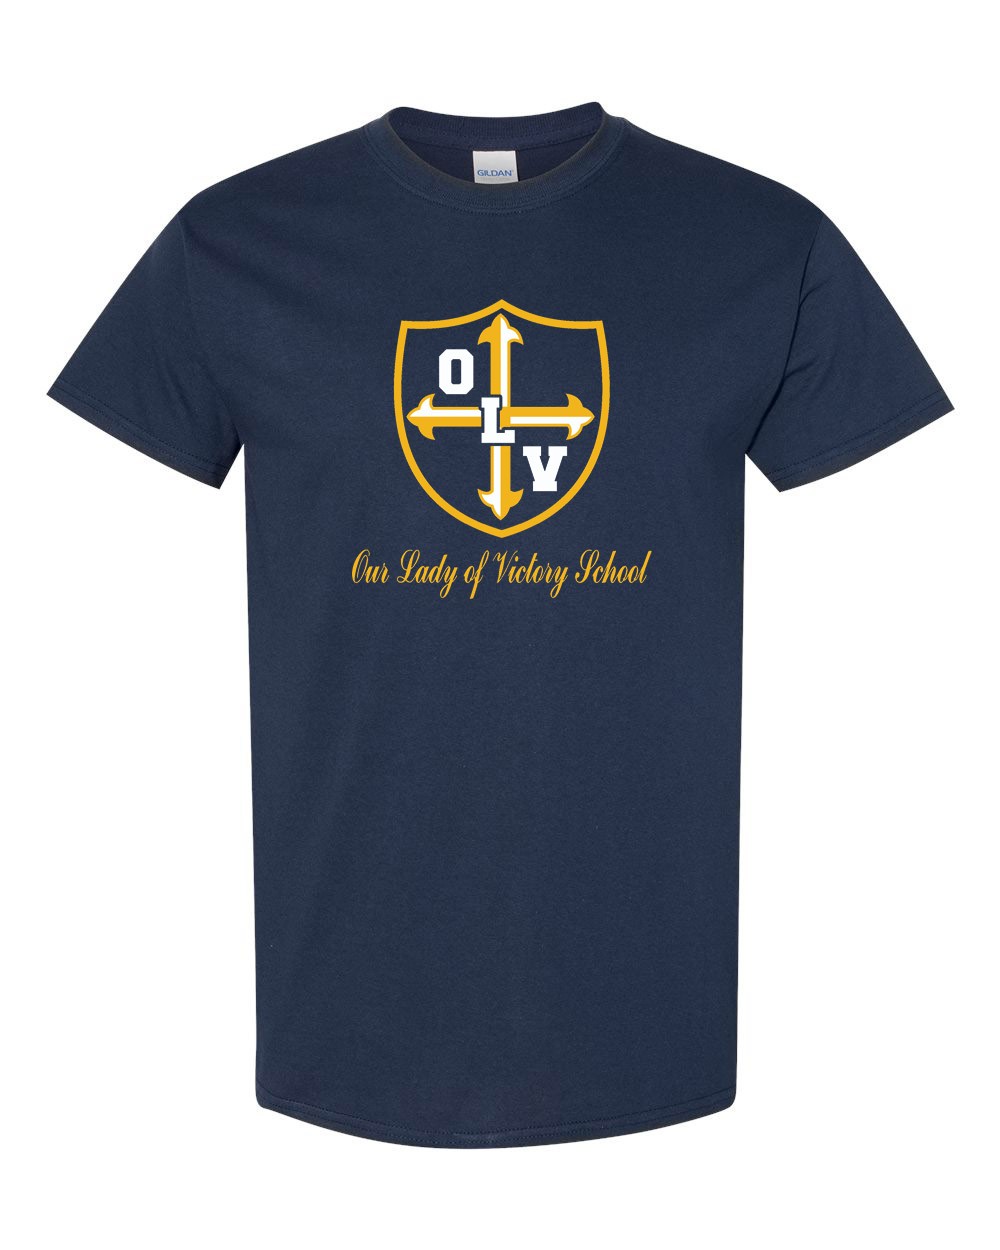 OLV Class of 2024 T-shirt & Zip Hoodie Combo w/Logo - Please Allow 2-3 Weeks for Delivery